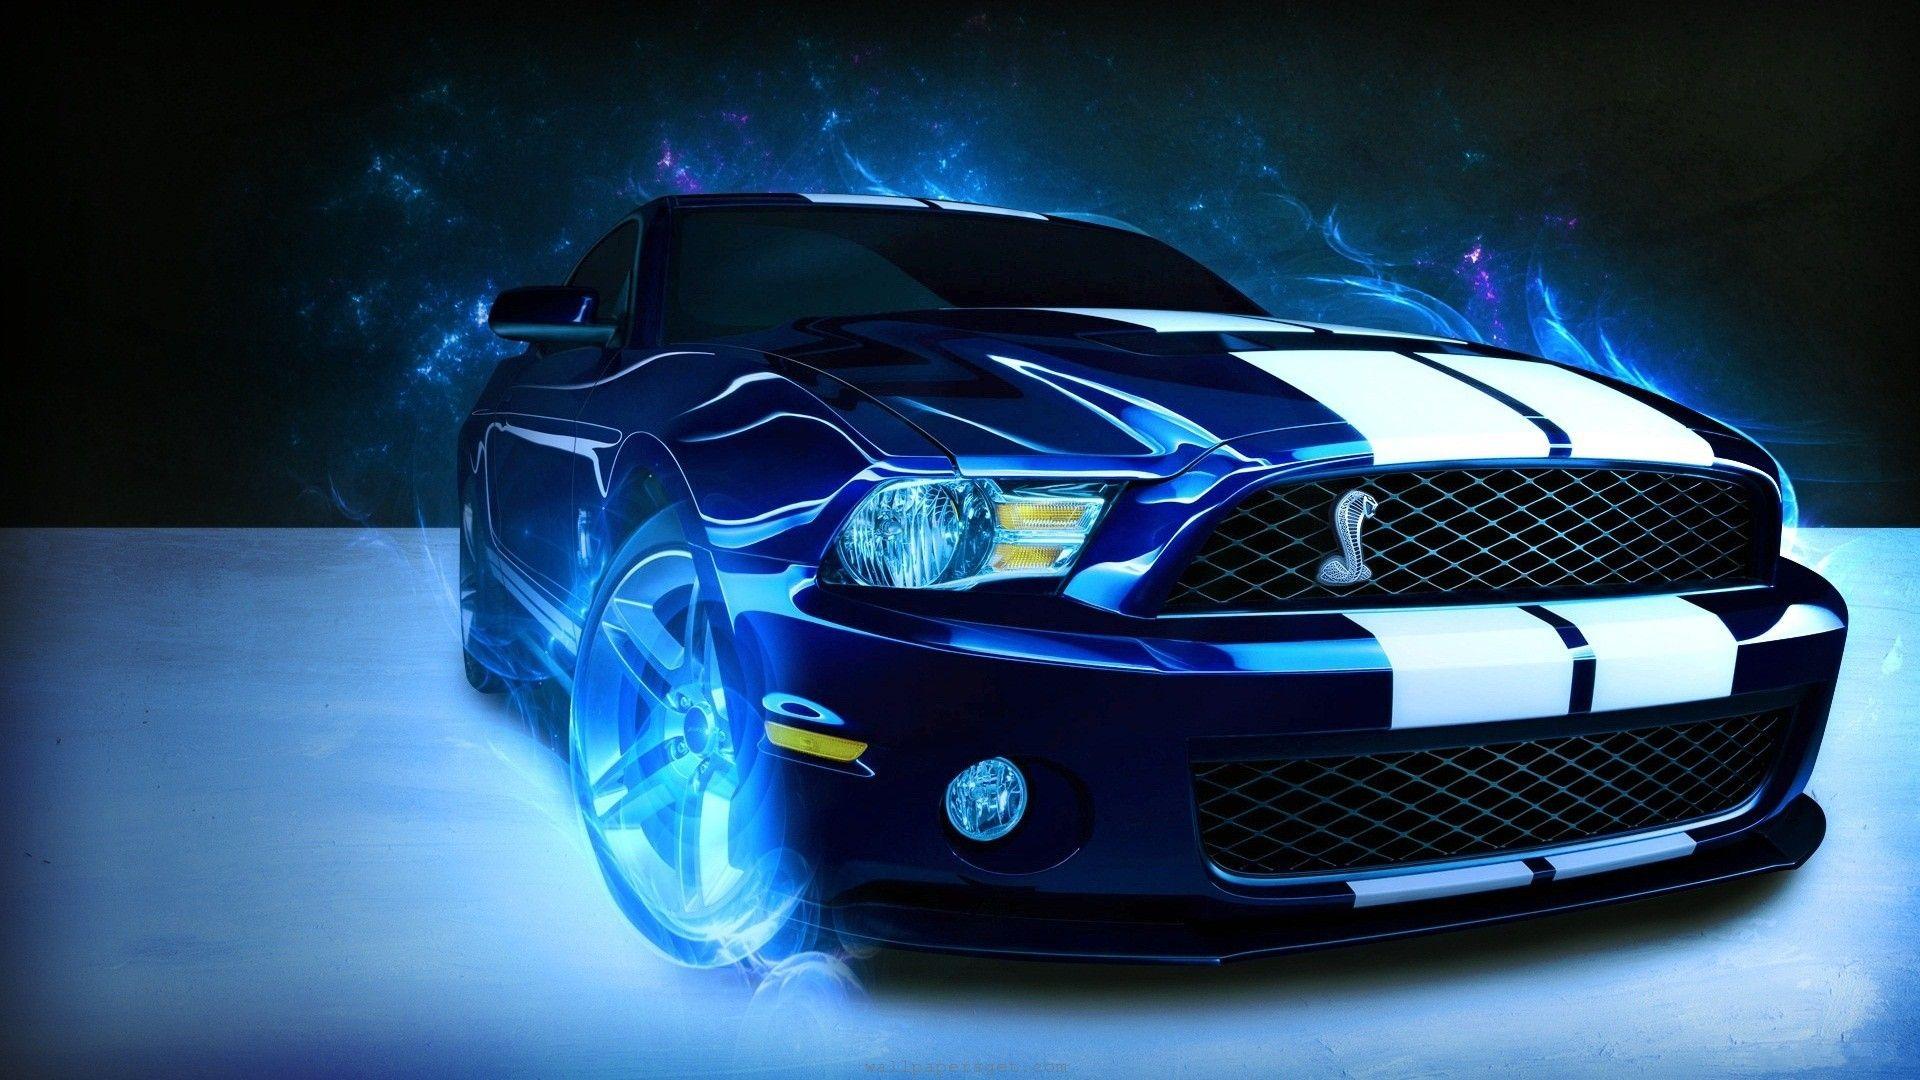 Ford Mustang Blue Laptop Wallpapers Top Free Ford Mustang Blue Laptop Backgrounds Wallpaperaccess